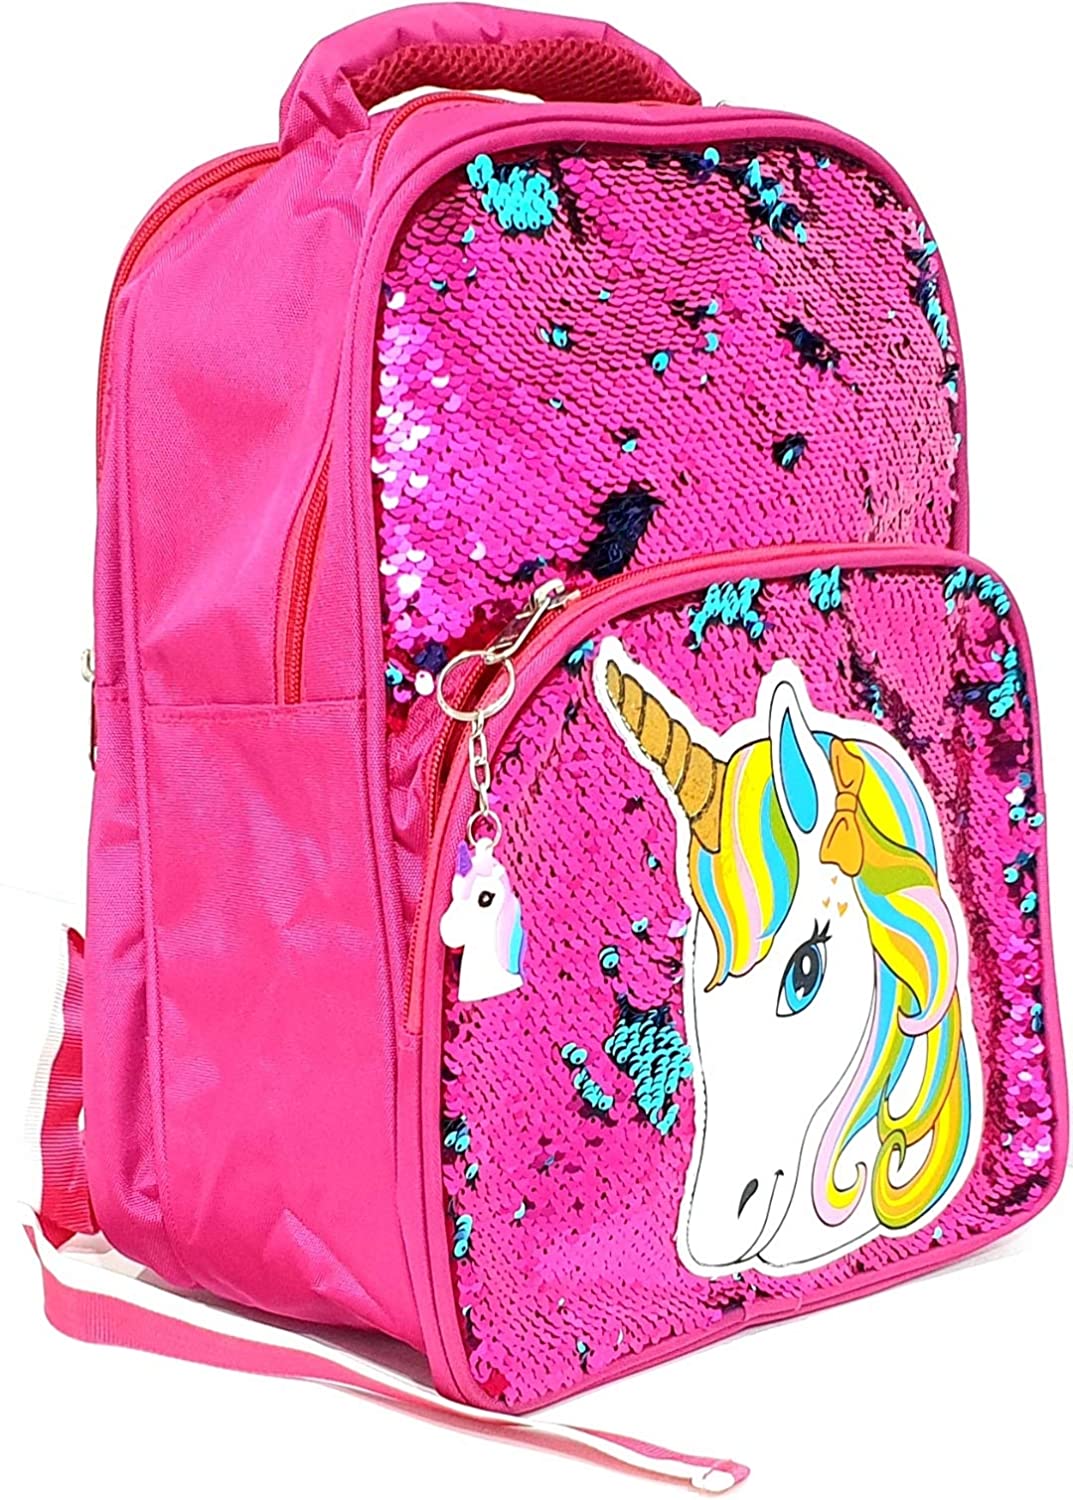 Dropship Girl And Women's Unicorn Pop Purse Pop Bag With Unicorn Pop Toy;  Shoulder Bag Fidget Toys Pop Fidget Backpack to Sell Online at a Lower  Price | Doba